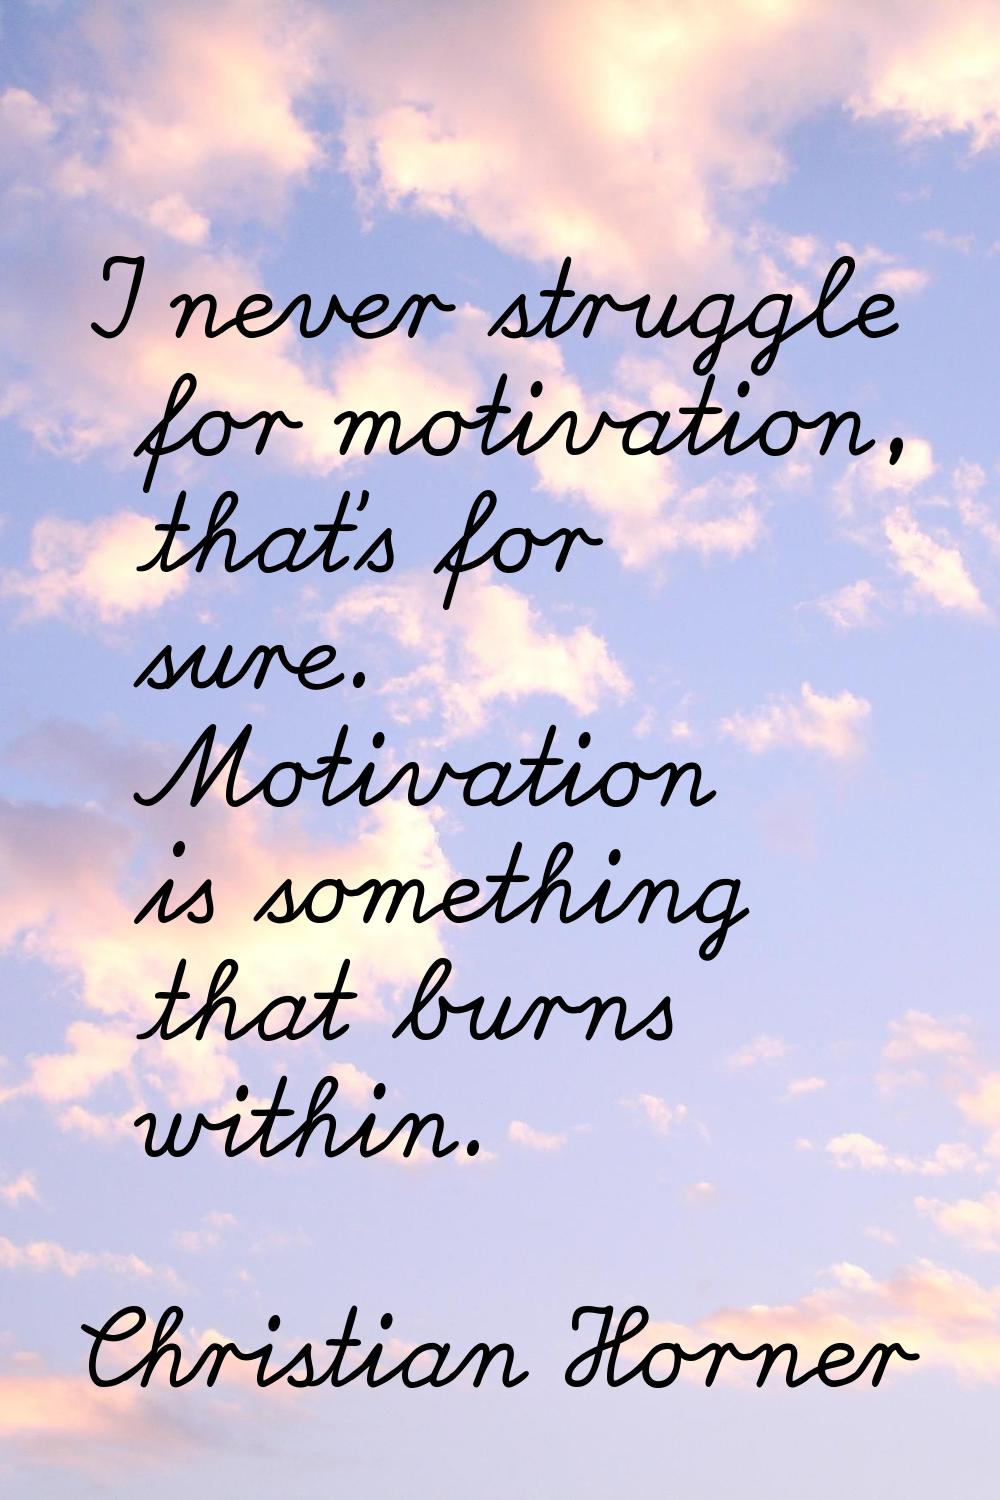 I never struggle for motivation, that's for sure. Motivation is something that burns within.